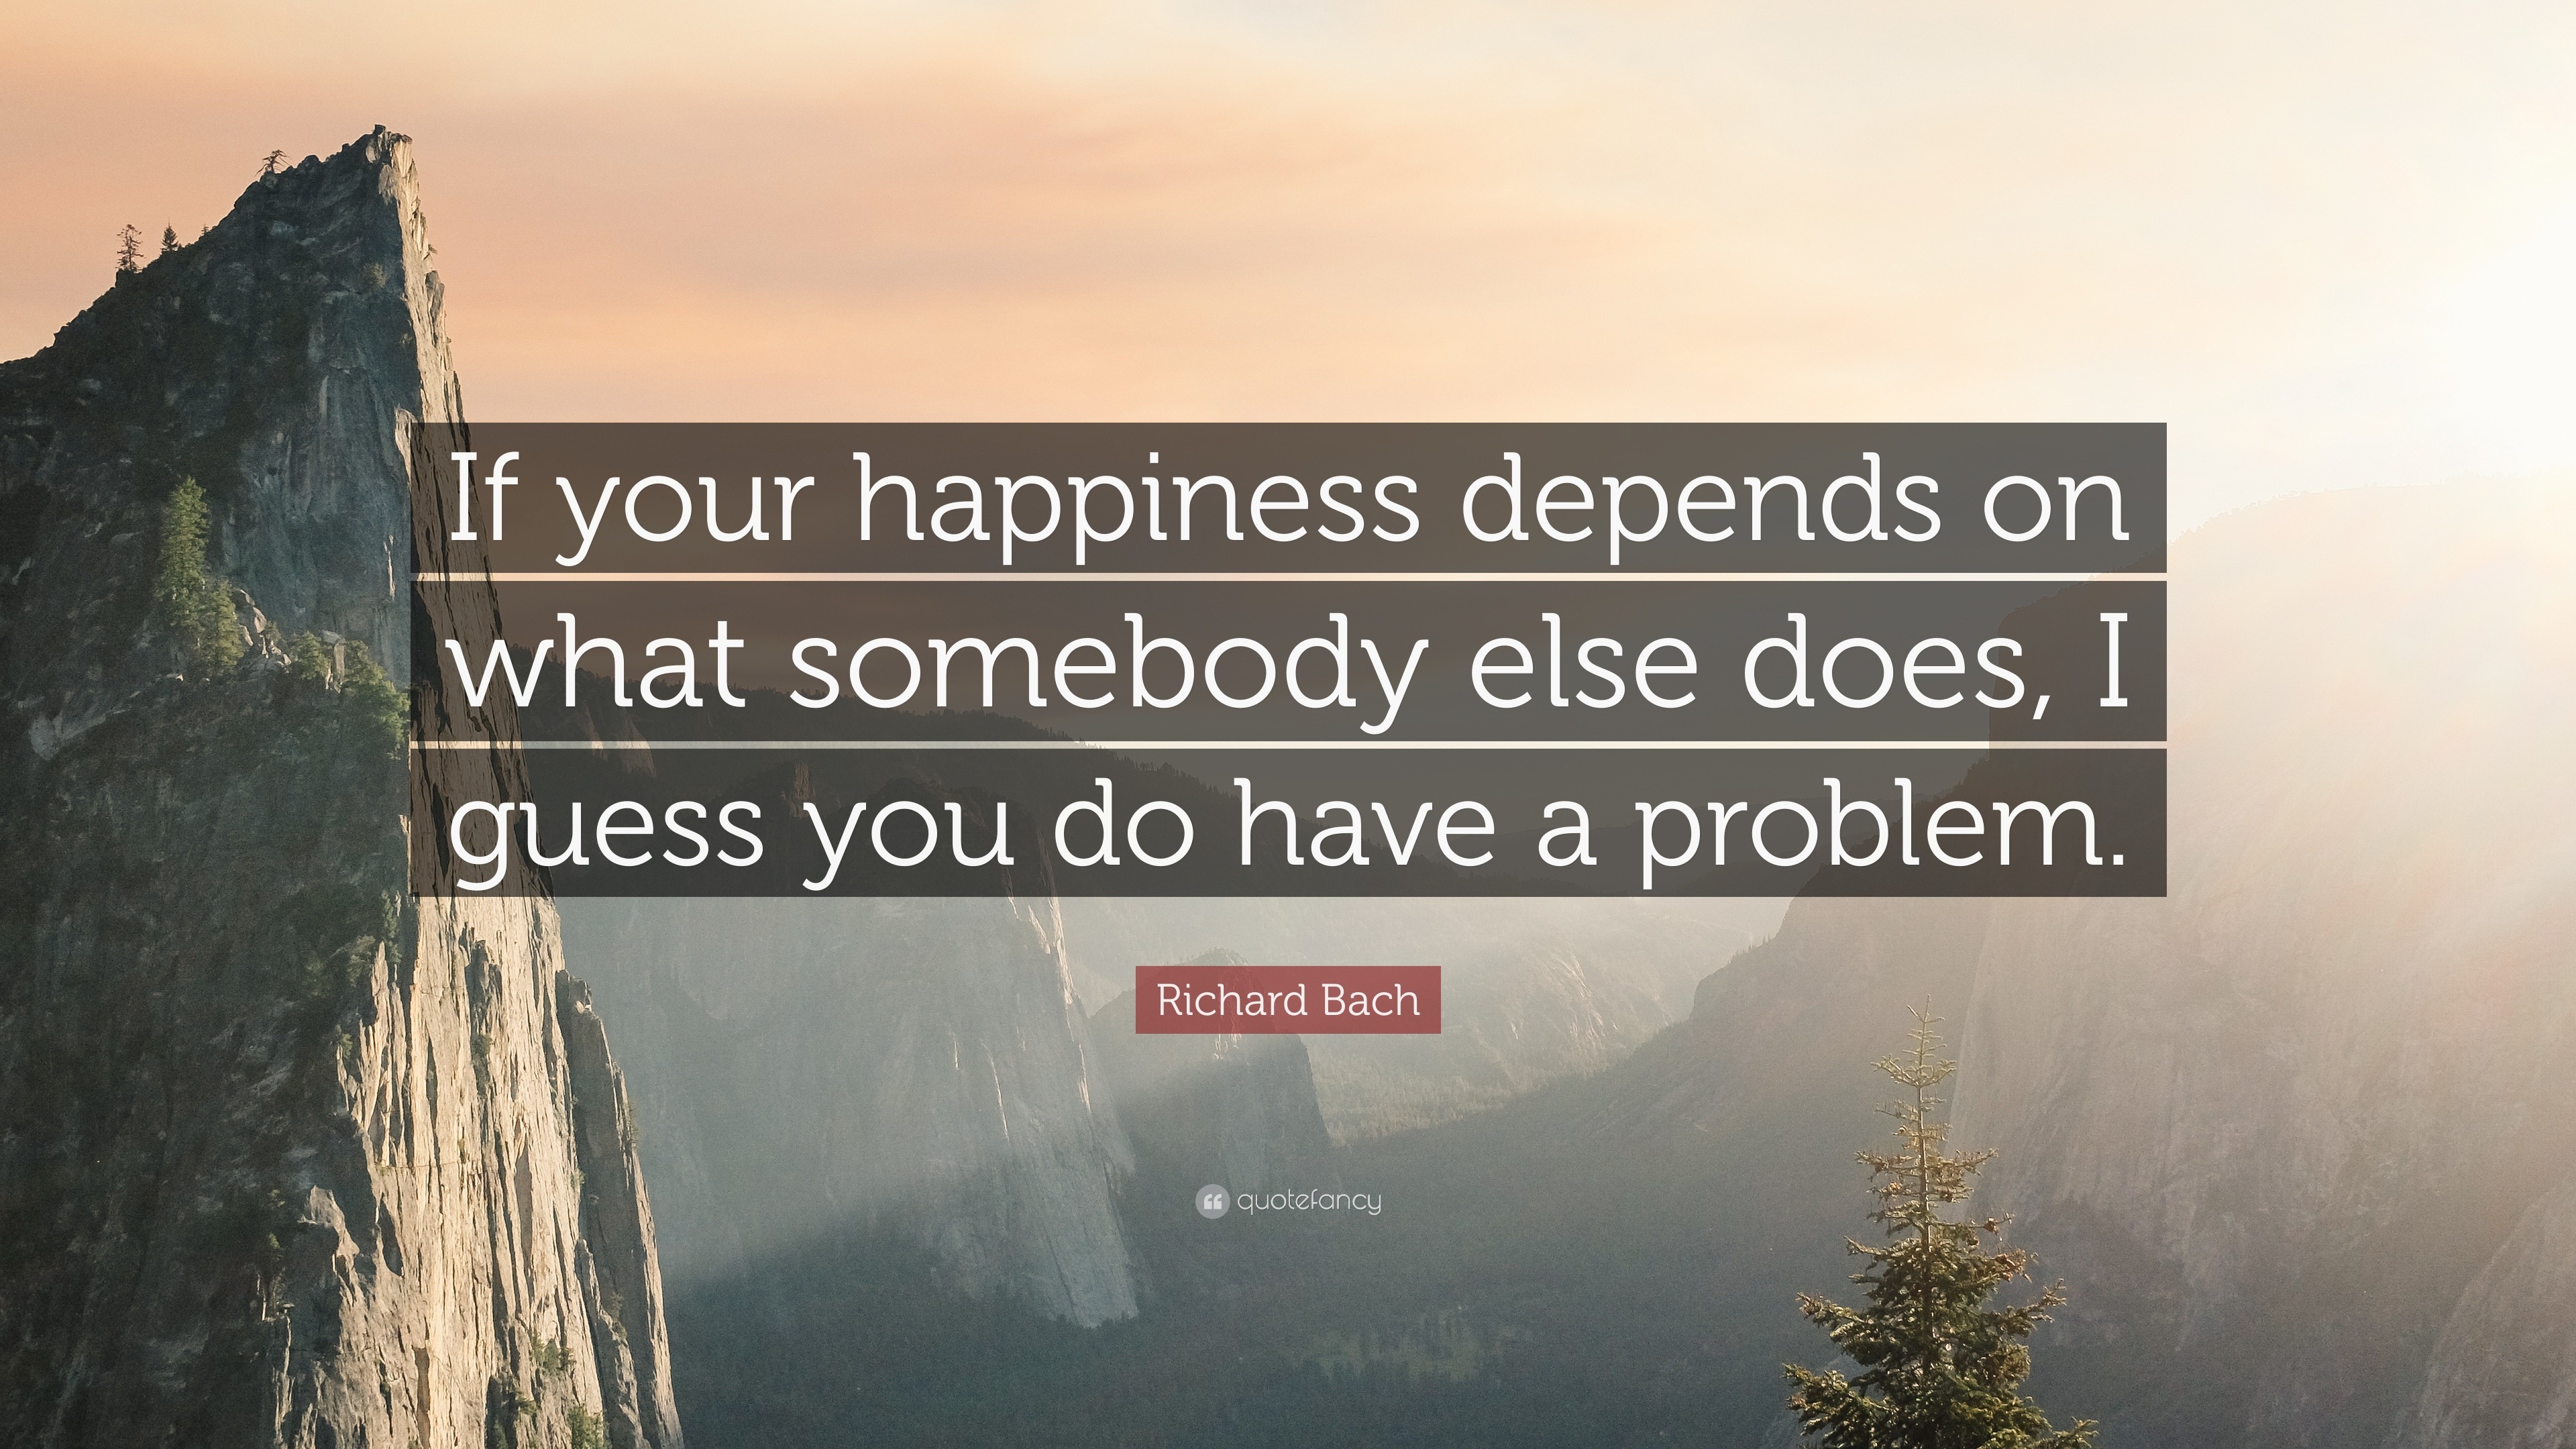 Richard Bach Quote: “If your happiness depends on what somebody else ...